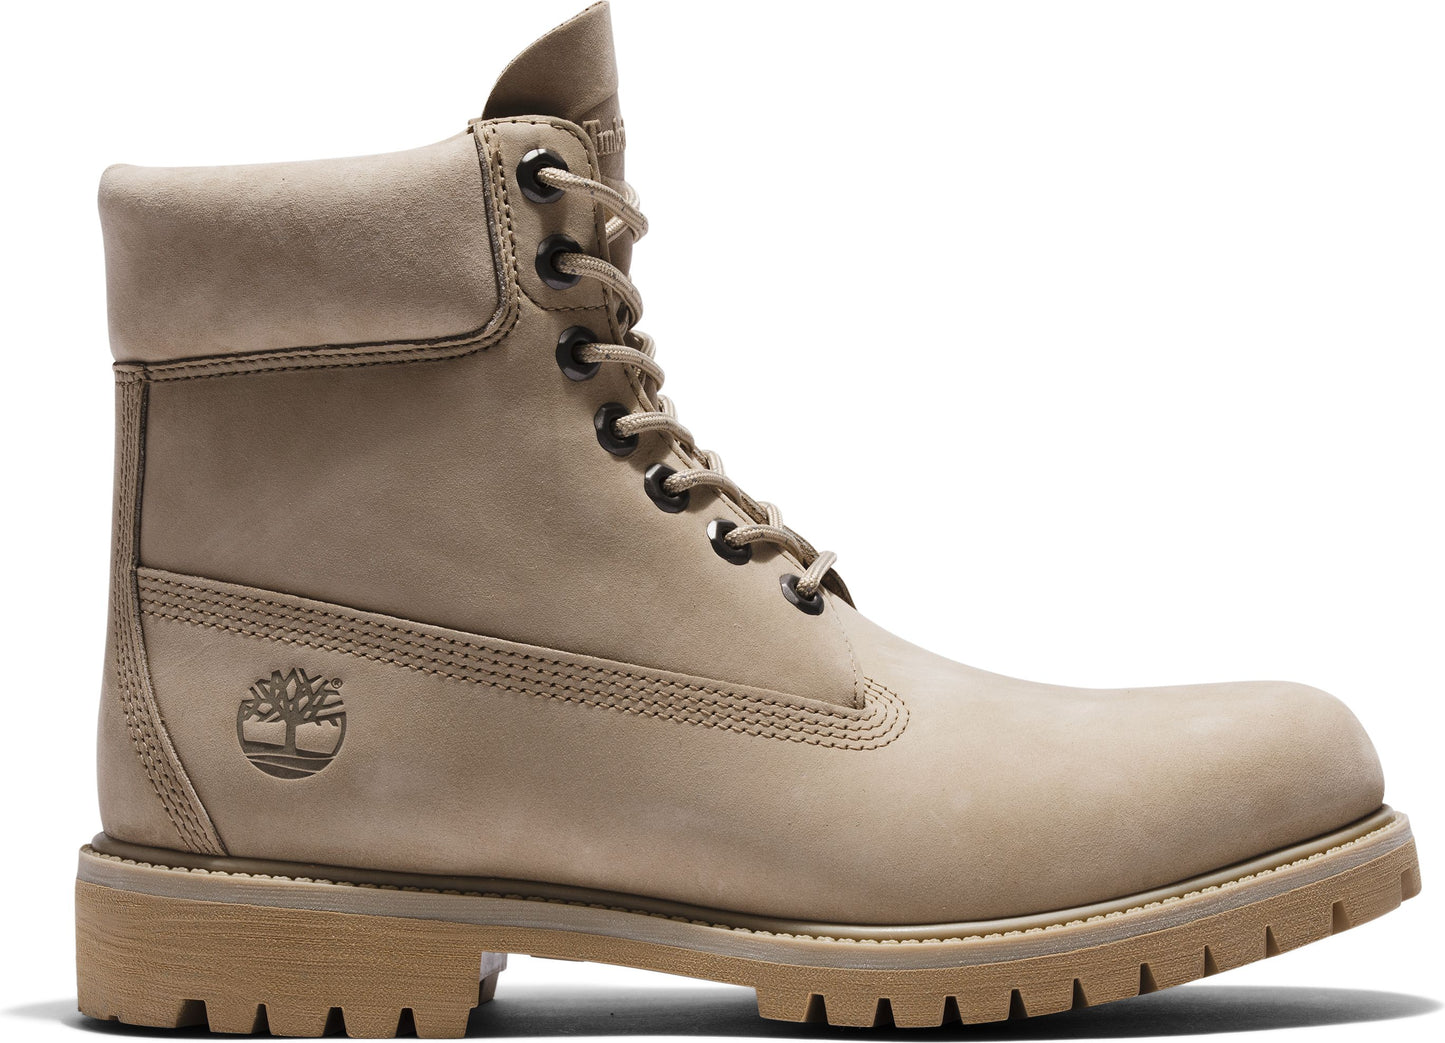 Timberland Boots 6inch Waterproof Boot Light Brown